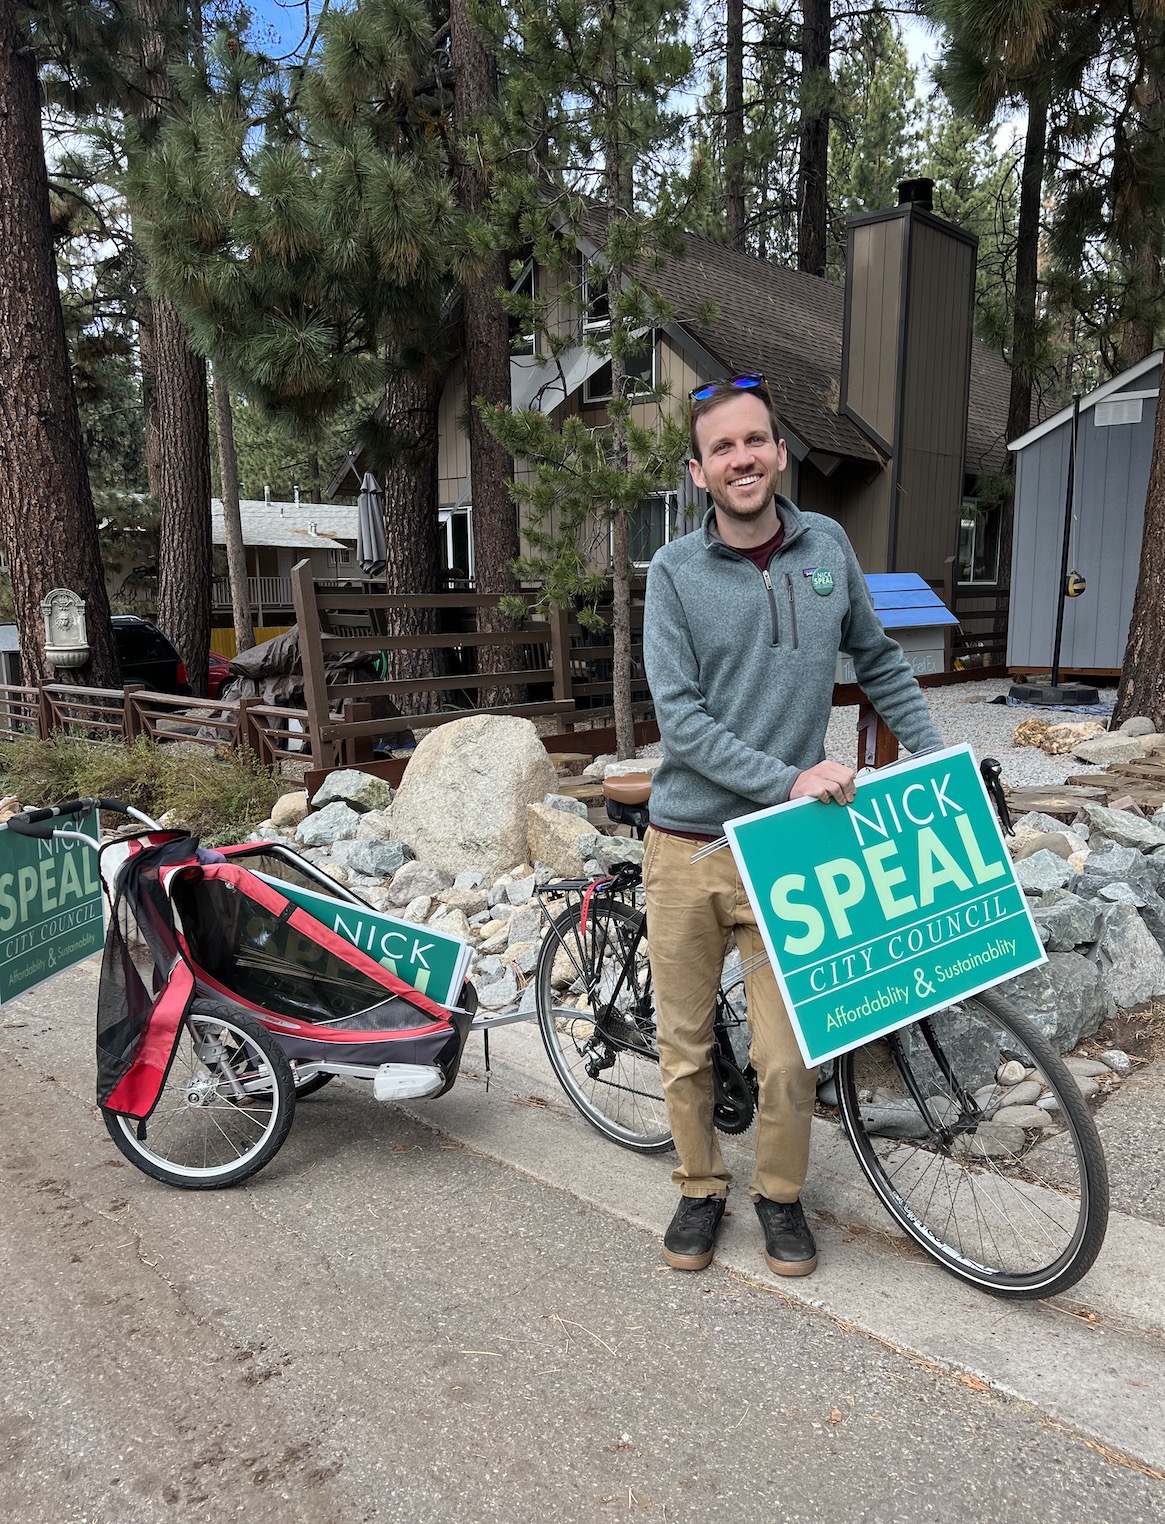 Nick with his bike and some yard signs